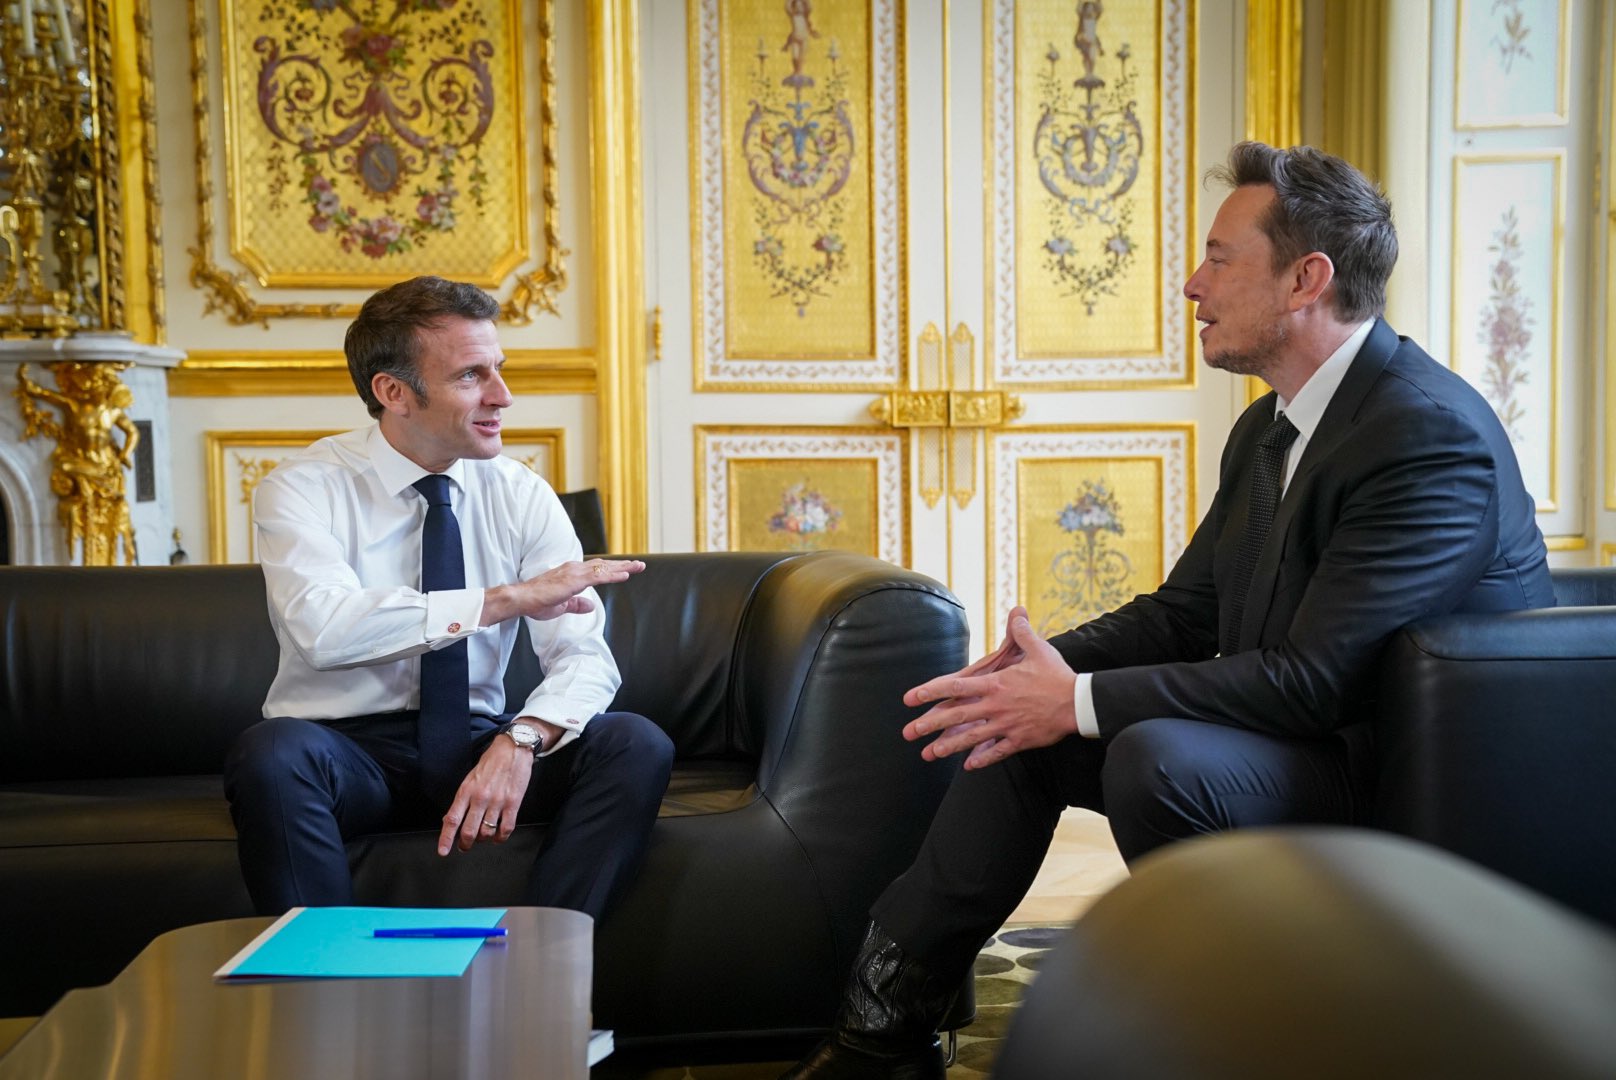 Elon Musk courted by French president as Tesla eyes global expansion